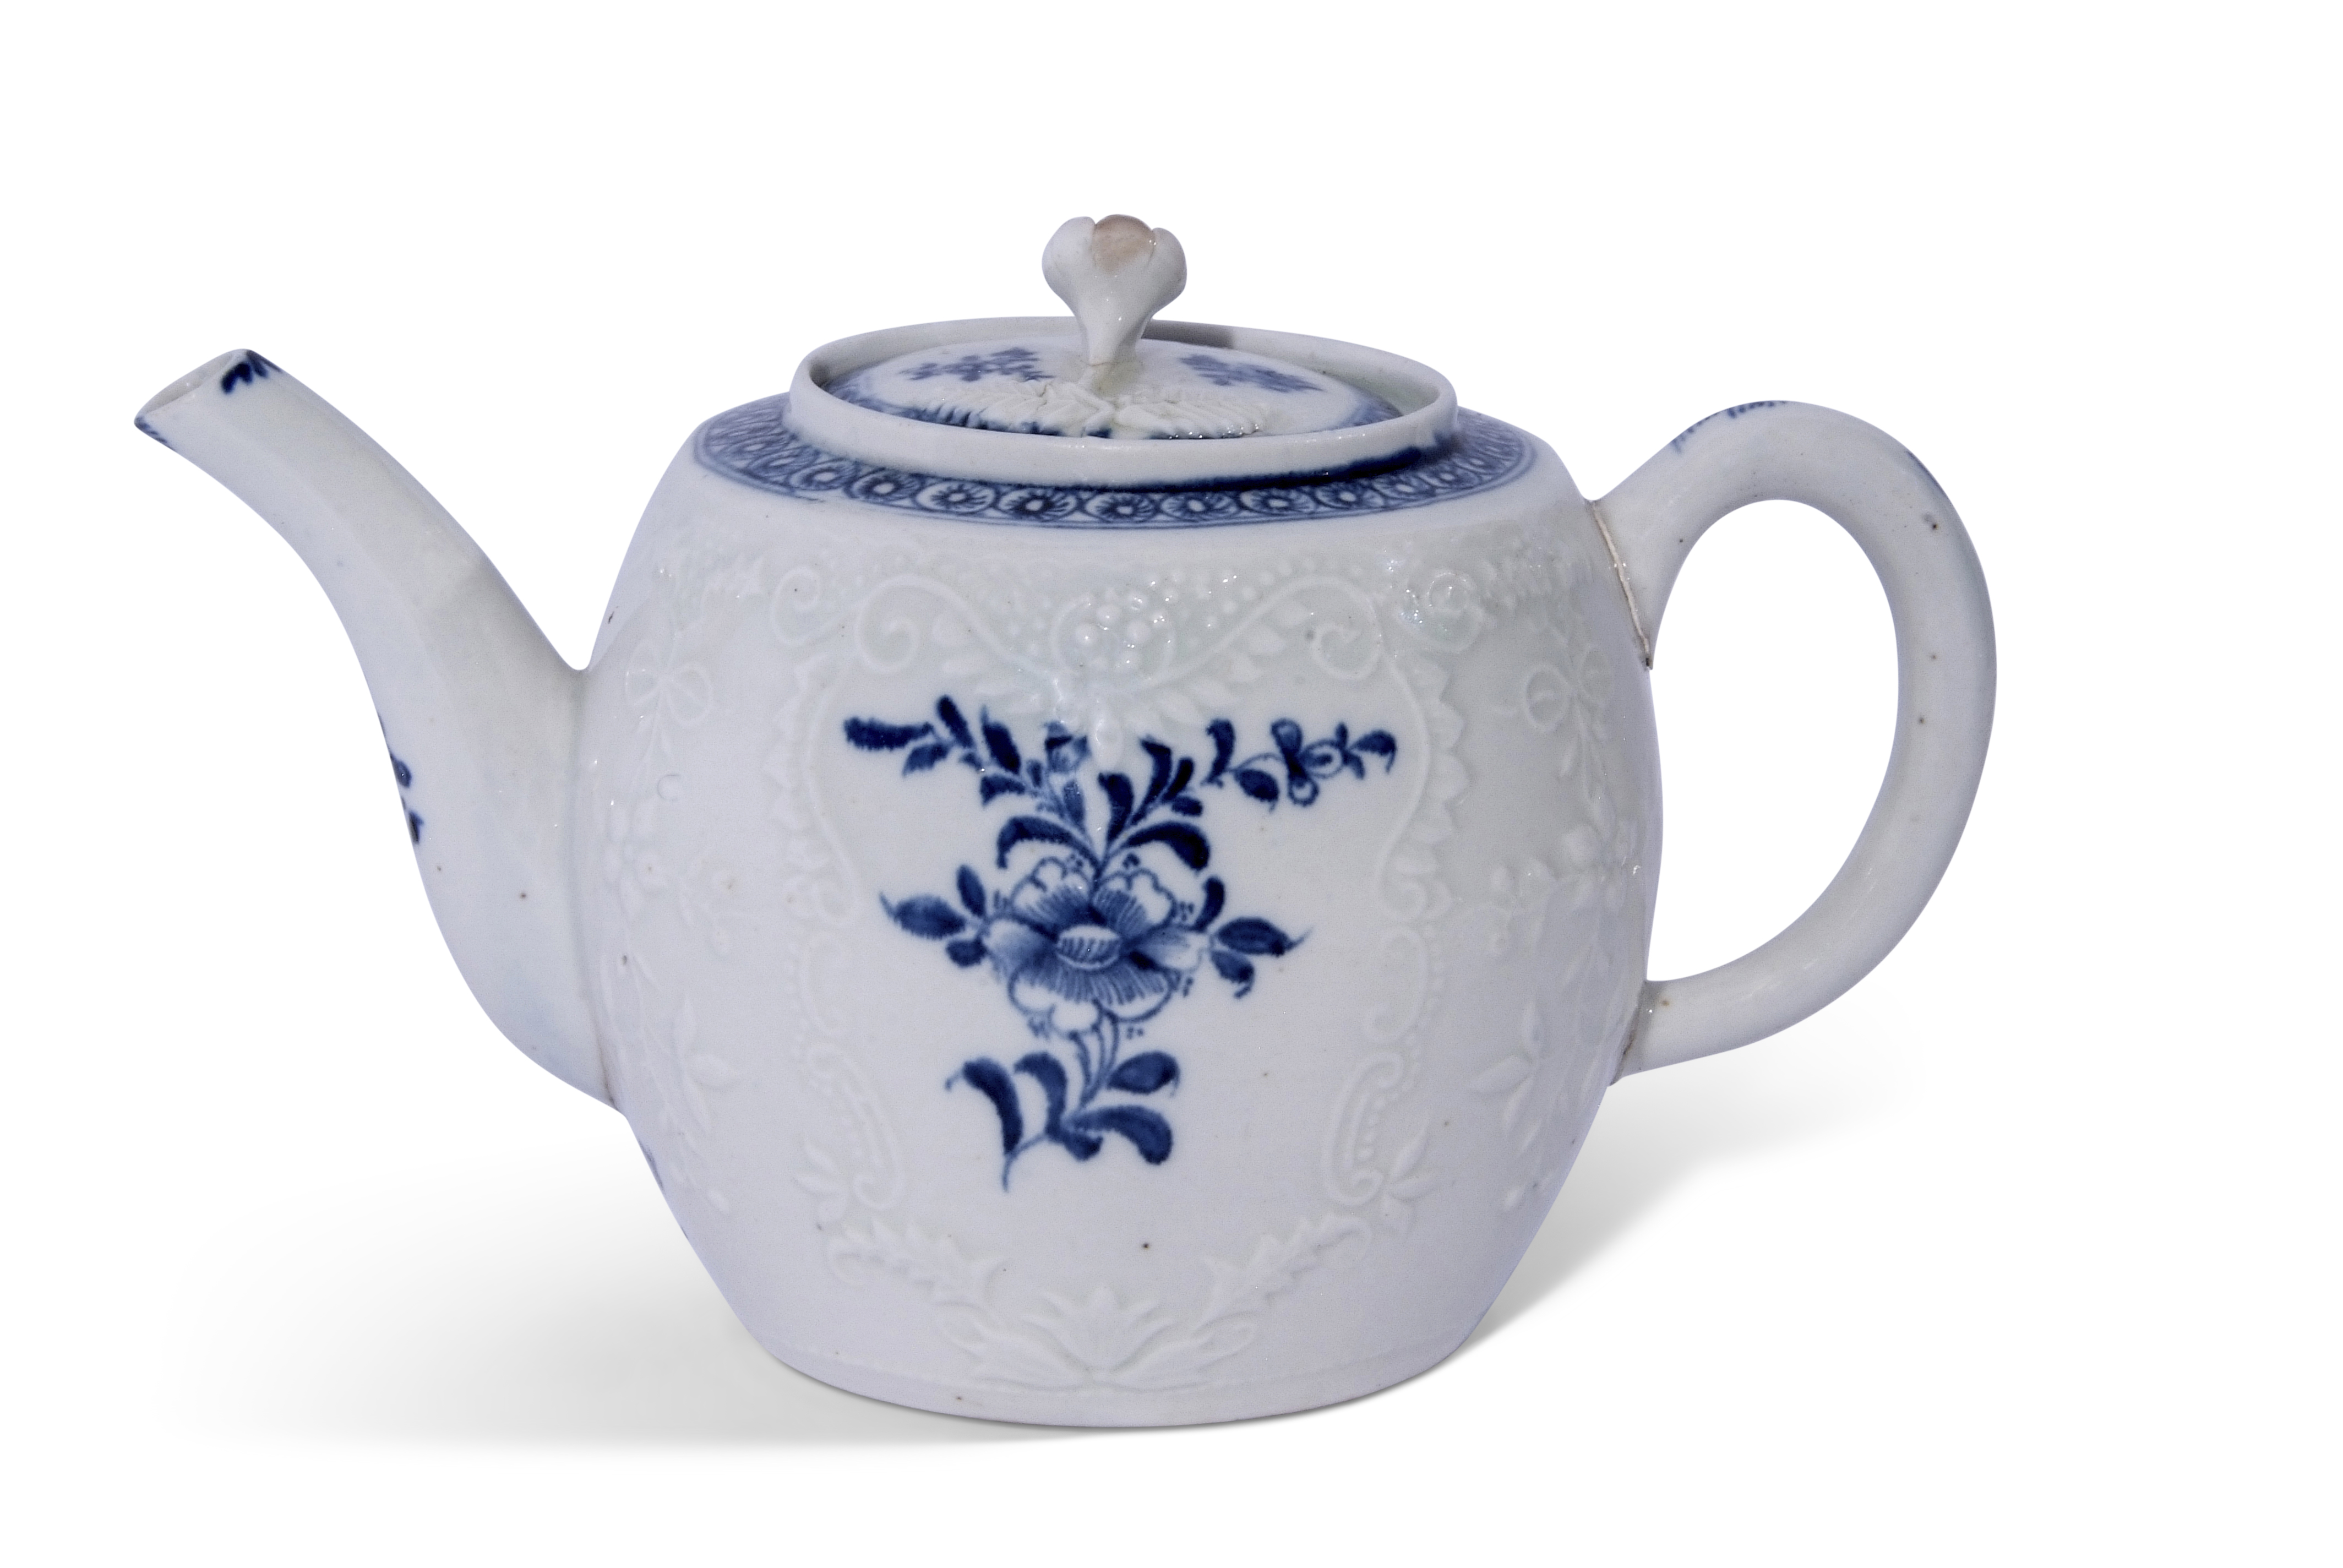 Unusual barrel shaped Lowestoft porcelain tea pot, the body moulded with a design of C-scrolls and